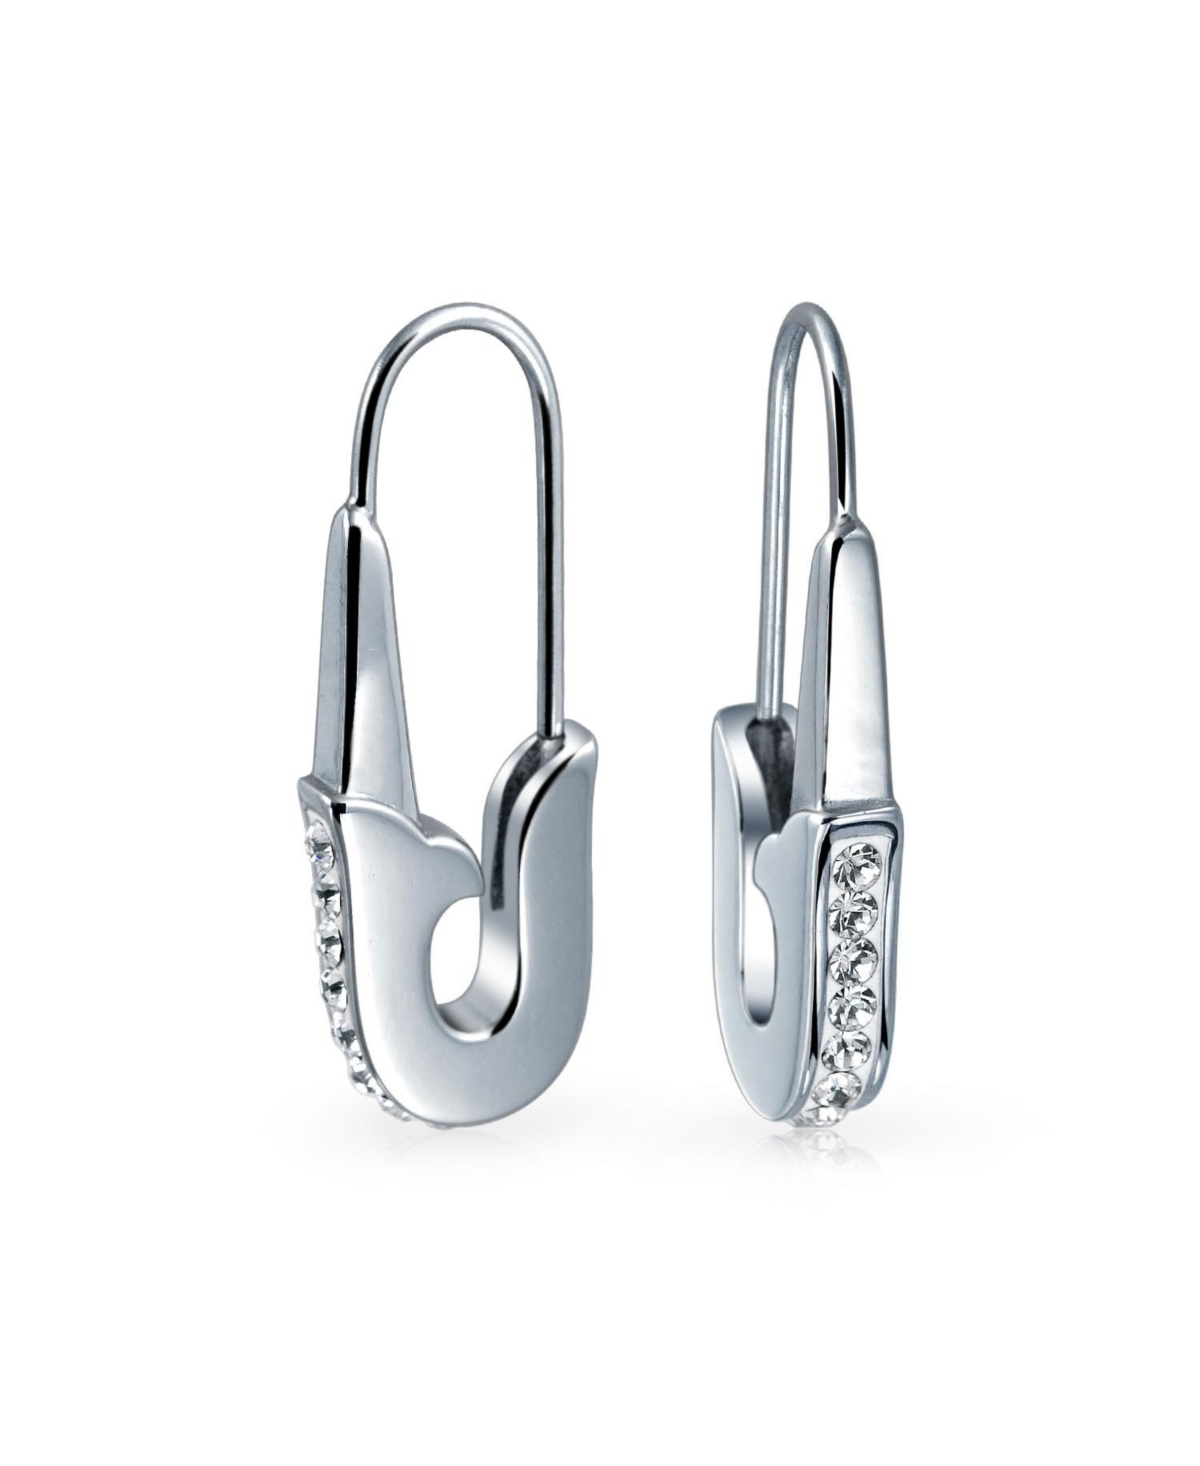 Safety Pin Threader Earrings Crystal Accent Silver Tone Surgical Steel - Silver tone